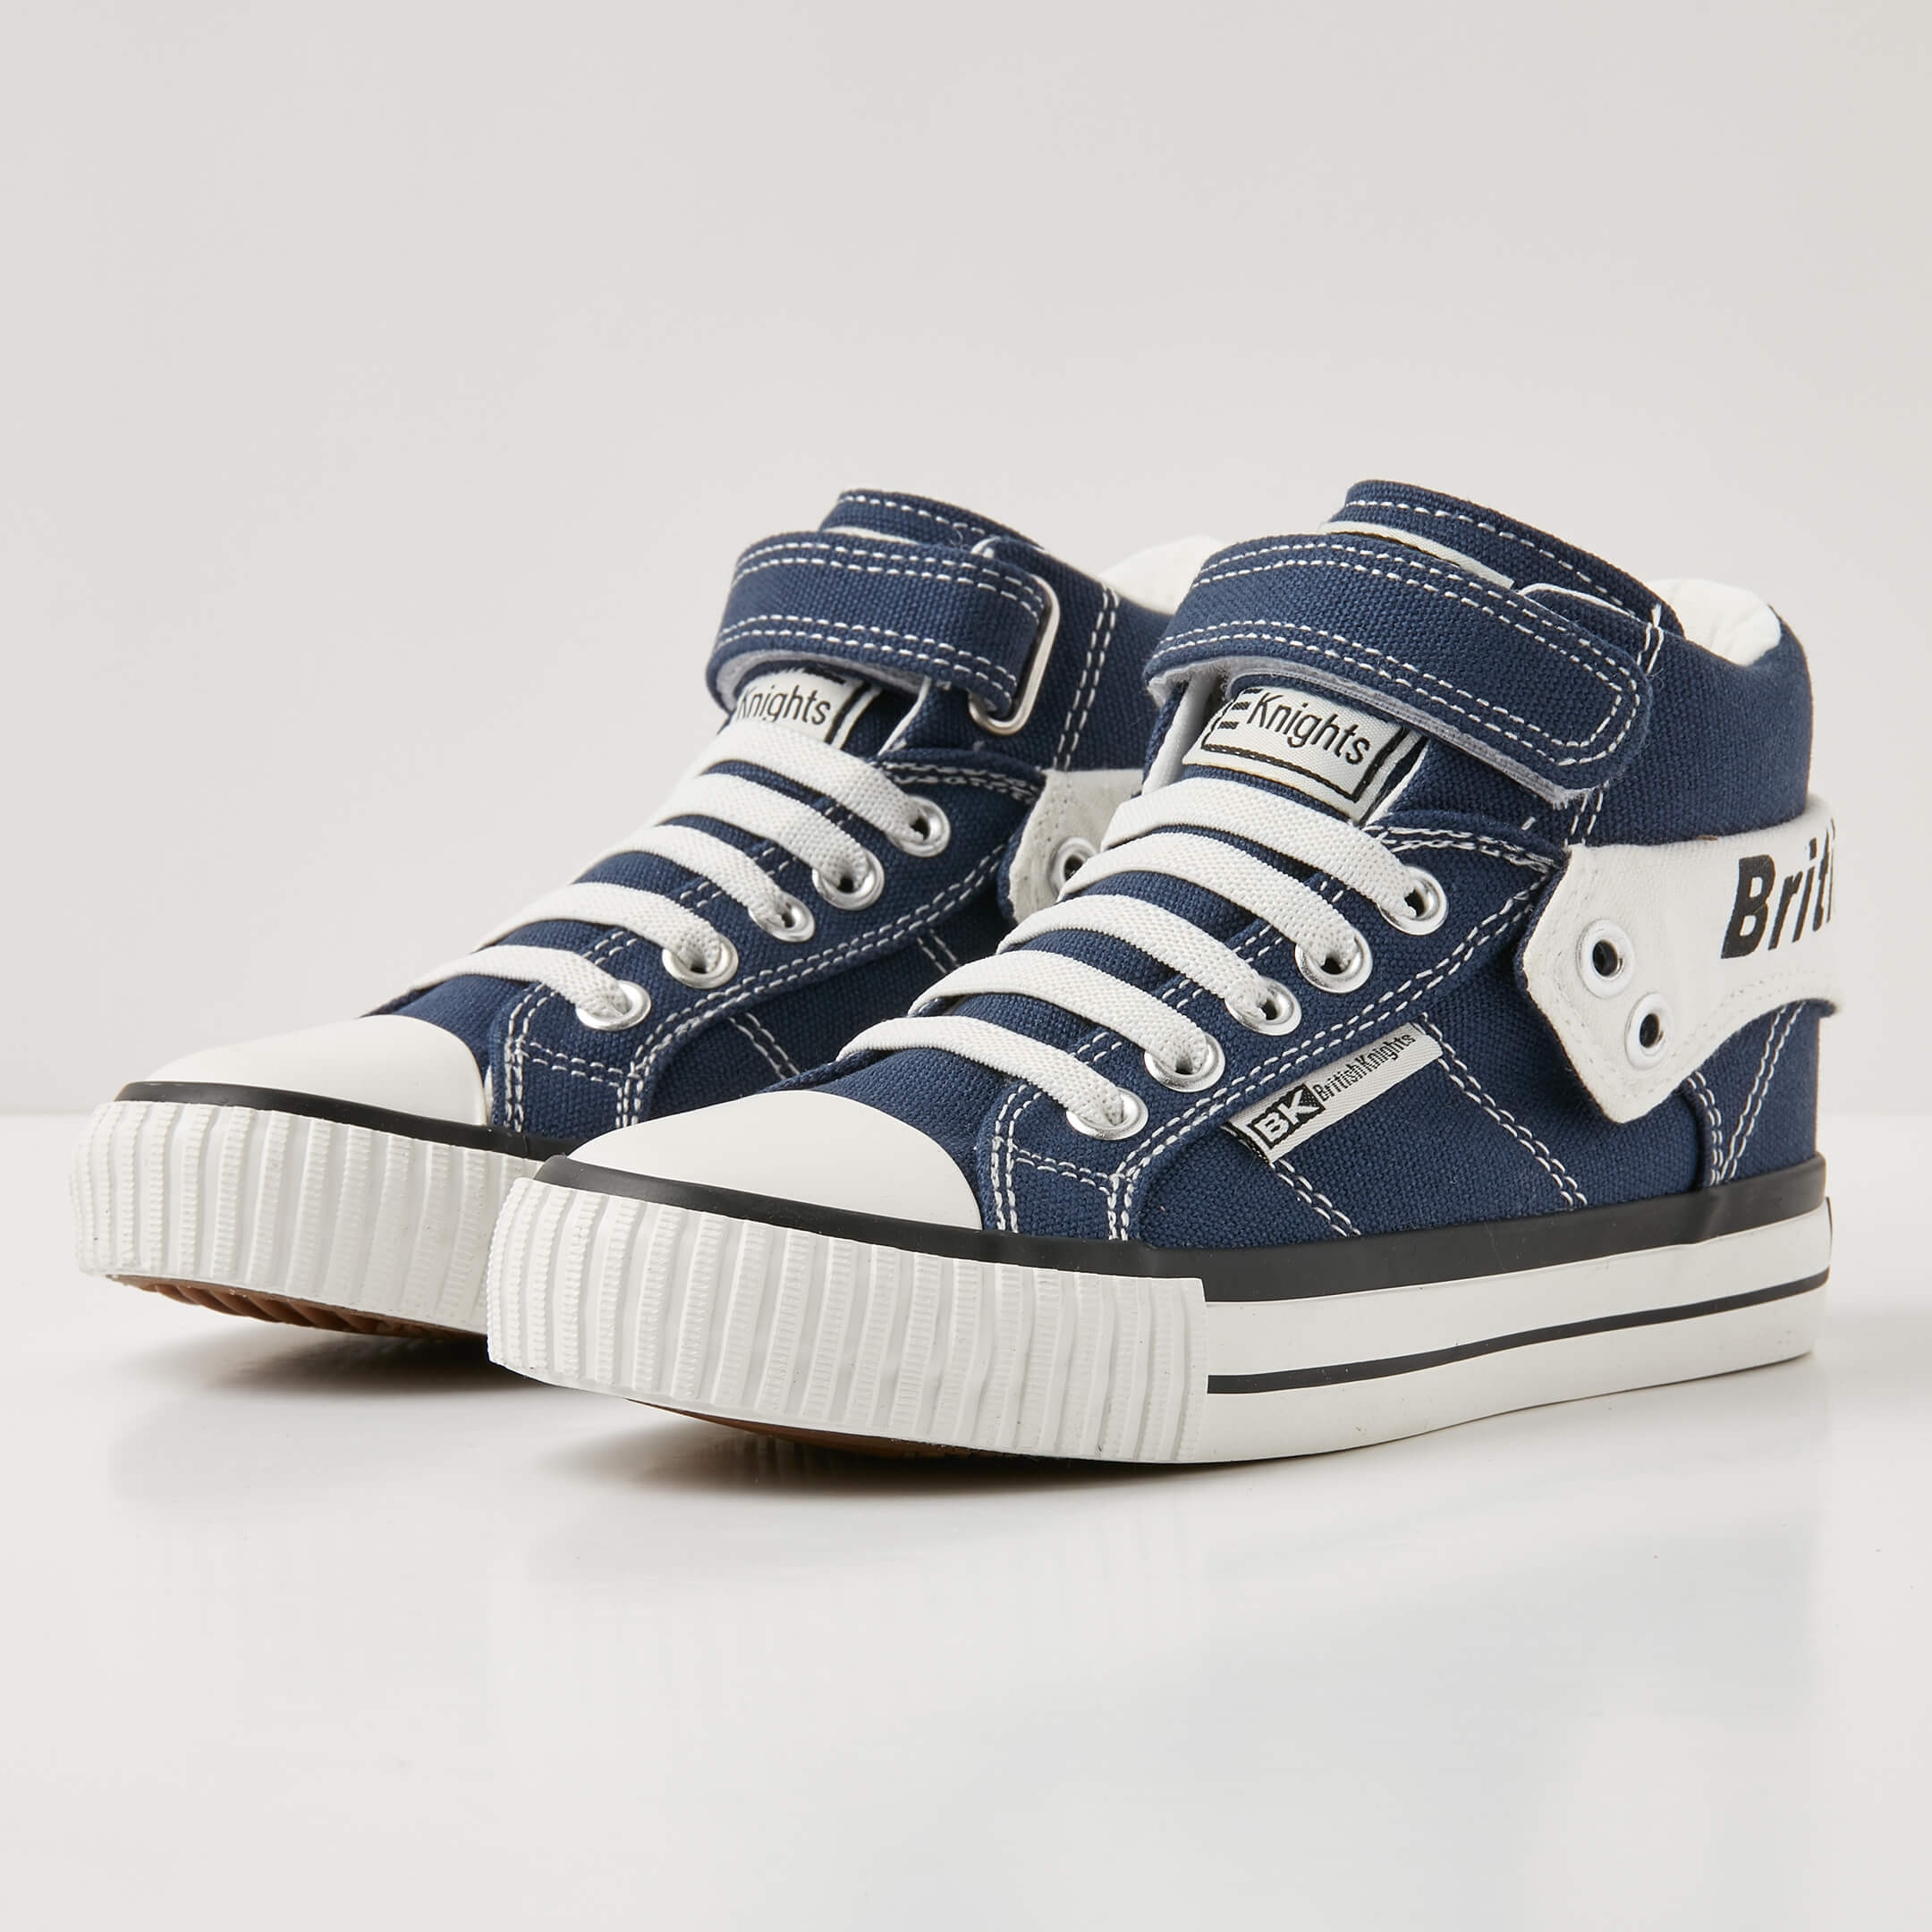 British Knights Sneaker Front view  B43-3702C-04 ROCO HIGH-TOP MALE